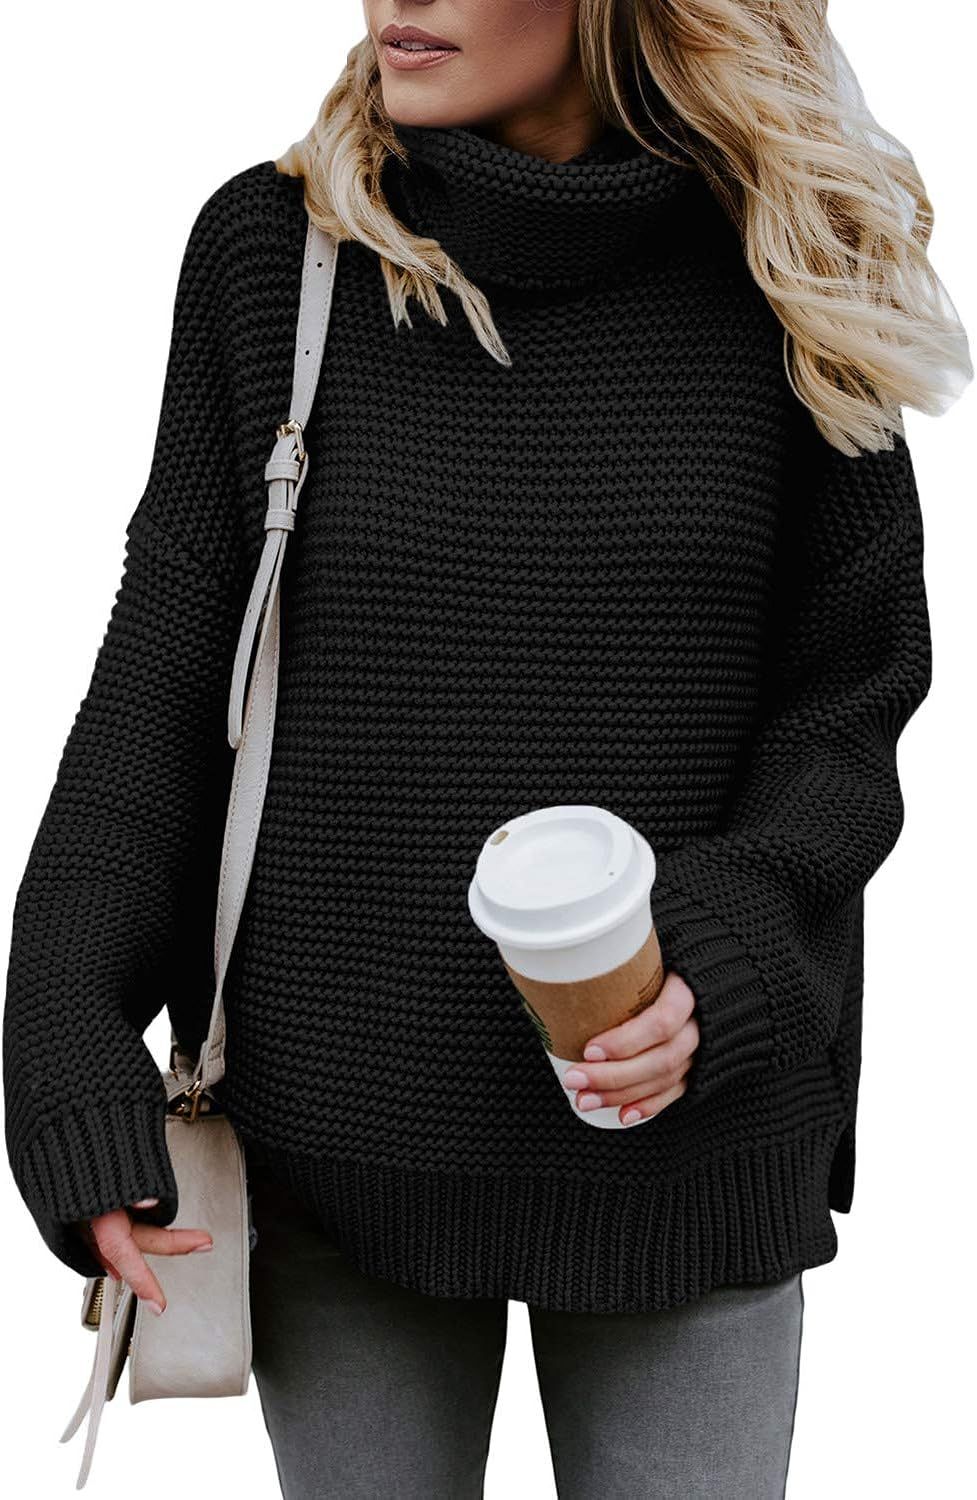 ZKESS Womens Casual Long Sleeve Turtleneck Chunky Knit Pullover Sweater Jumper Tops | Amazon (US)